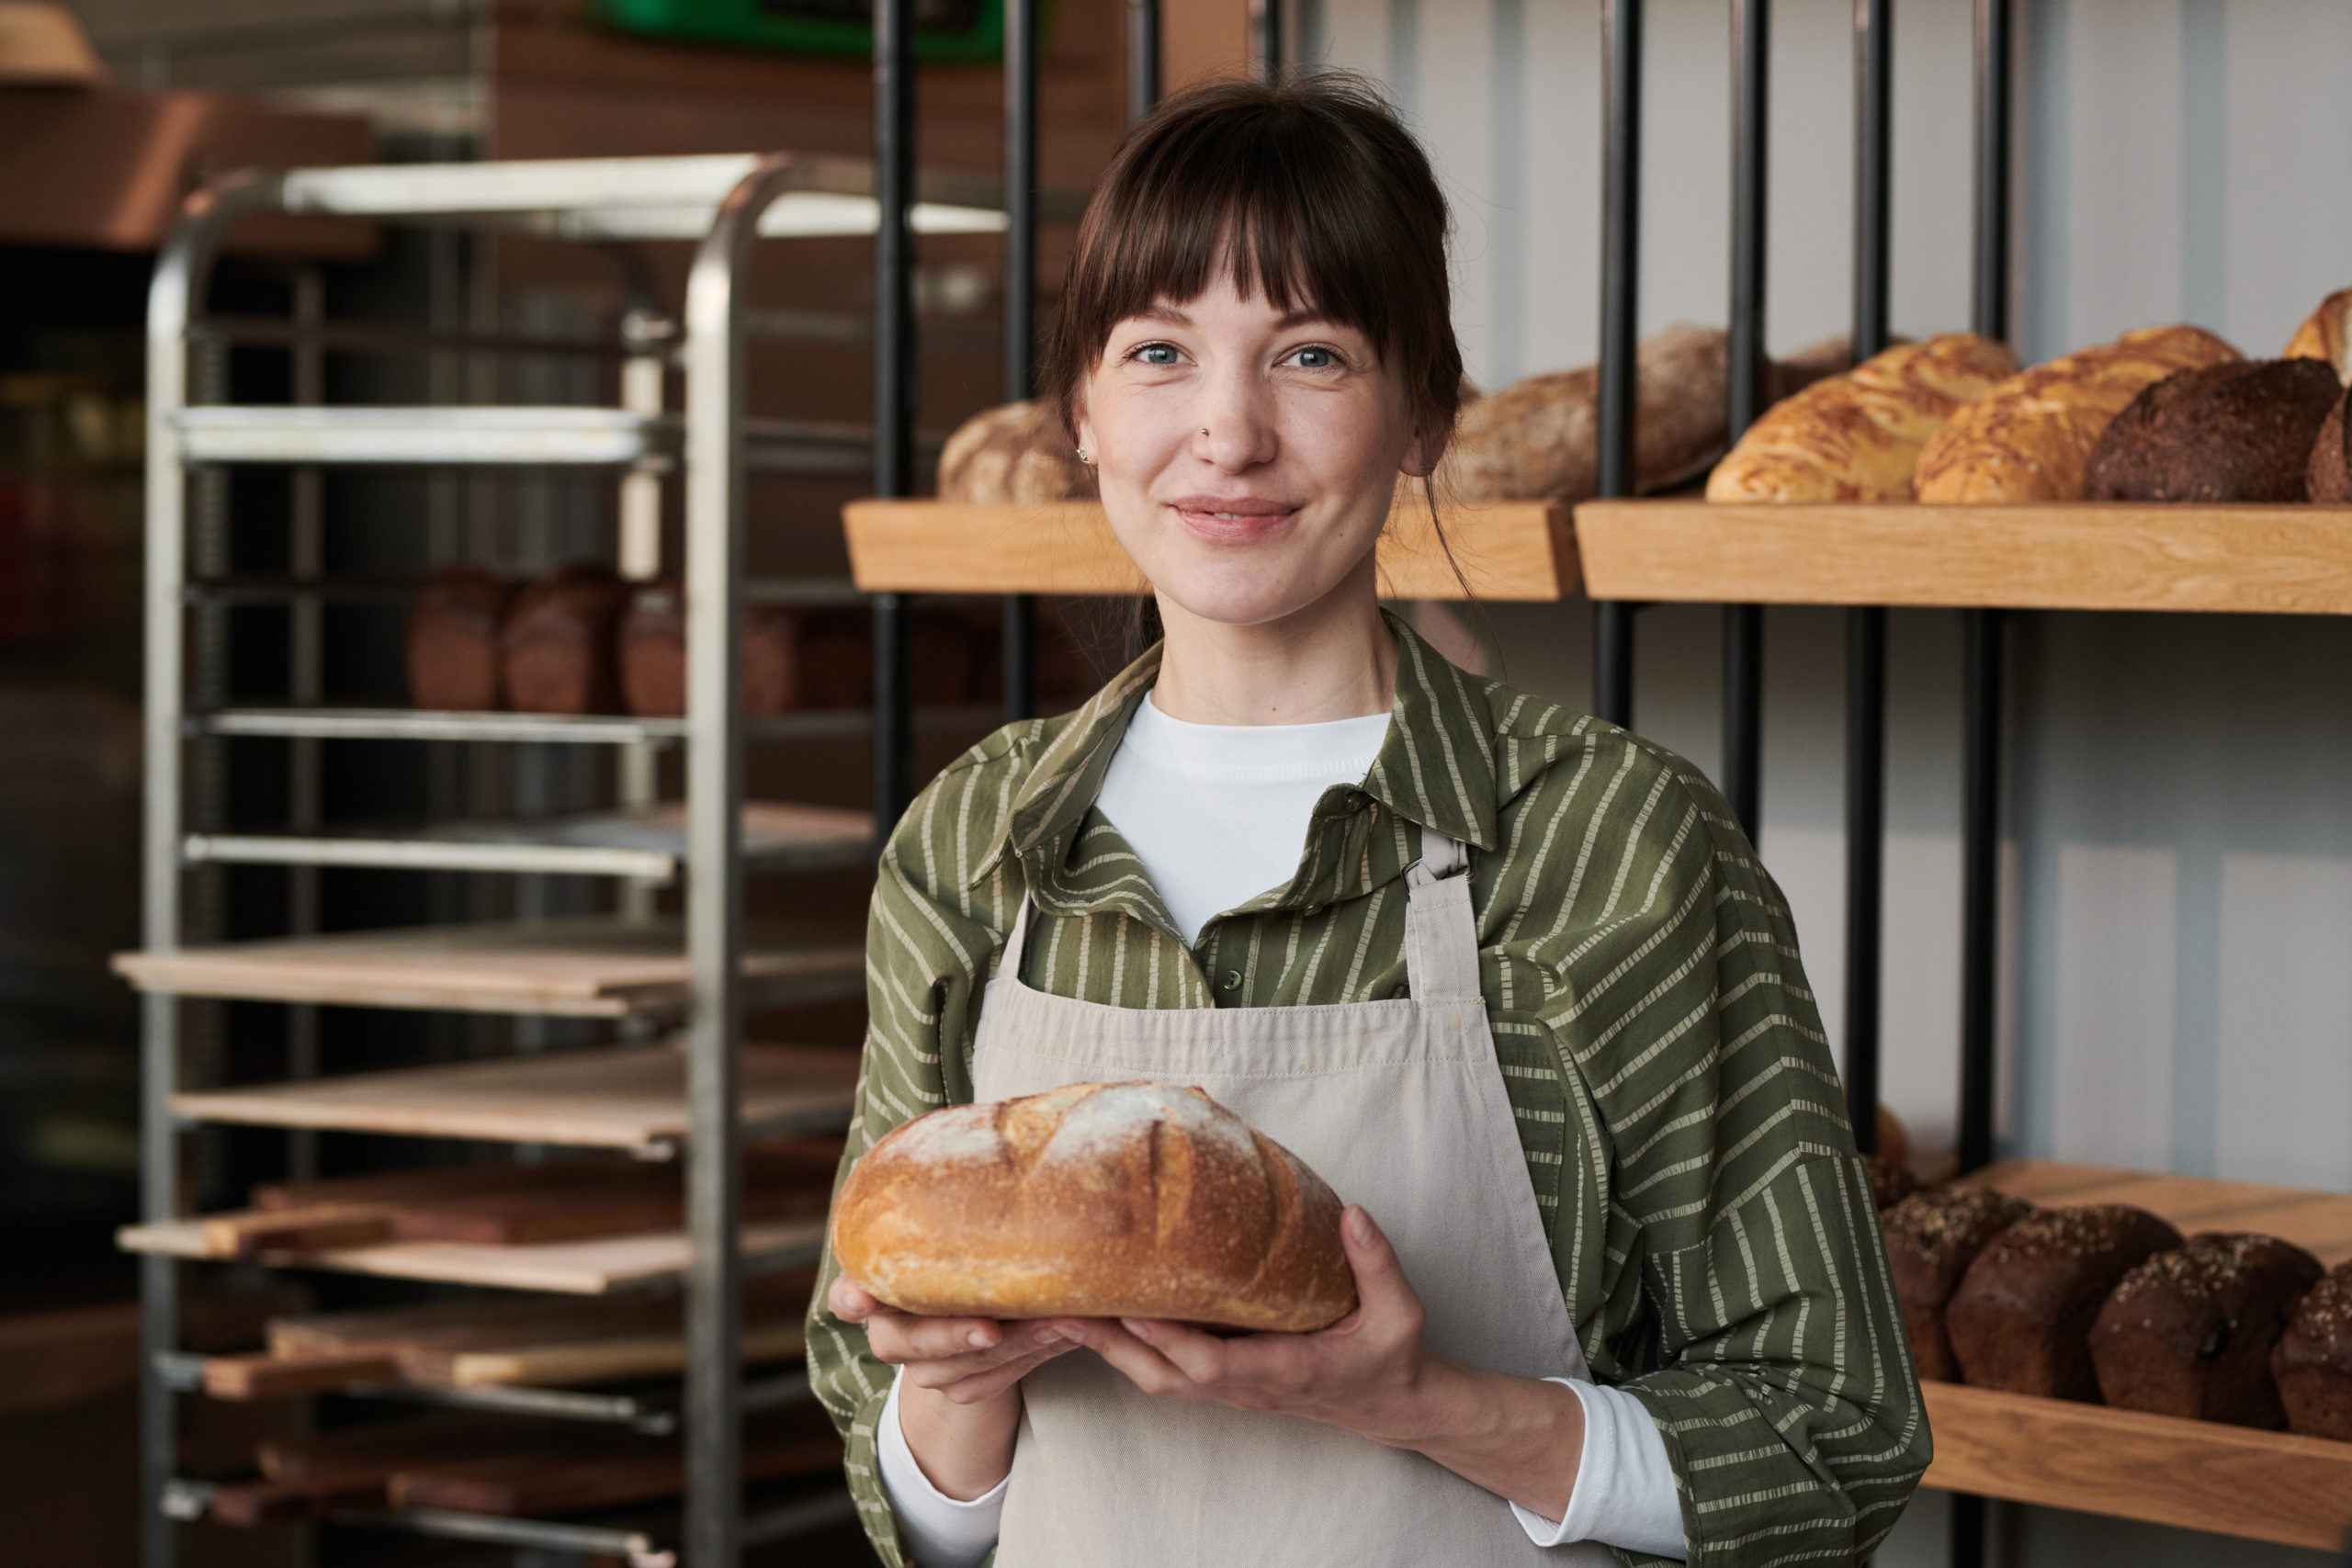 Successful micro business bakery with loaf of bread